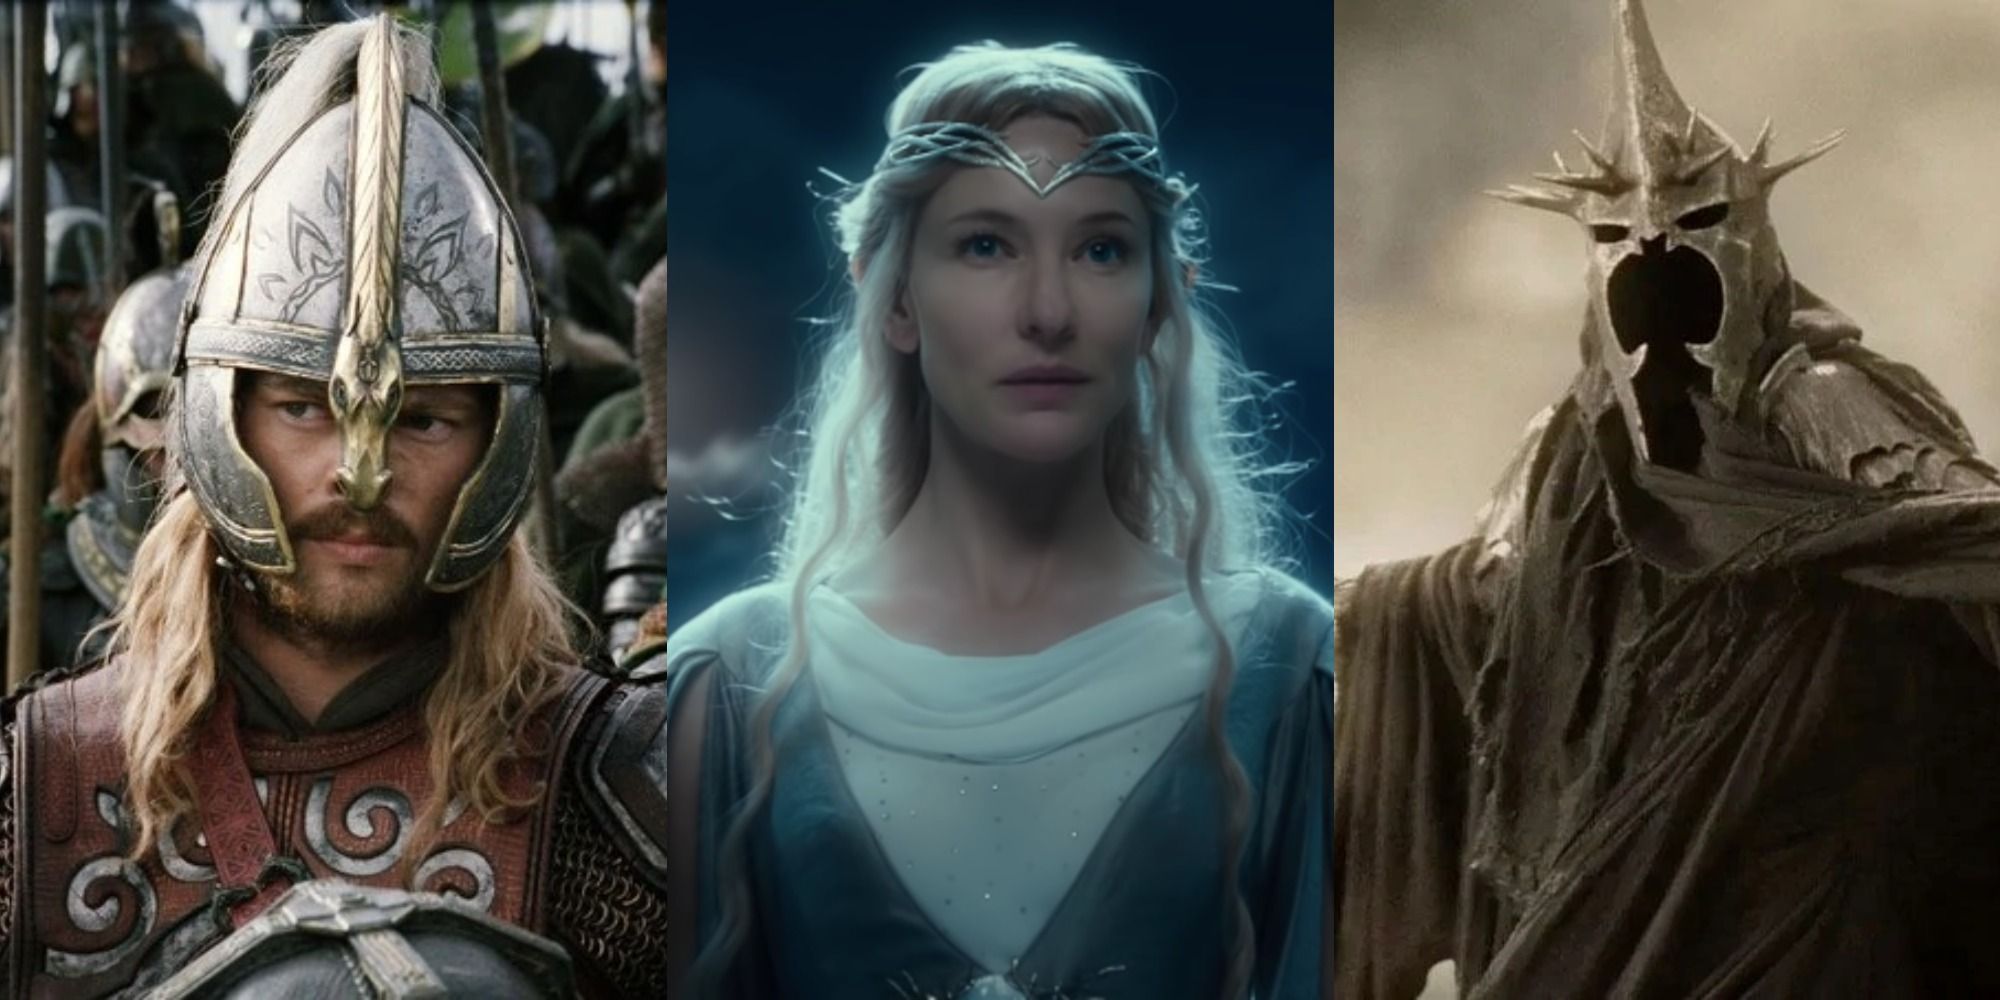 The Lord Of The Rings: 10 Side Characters With Main Character Energy